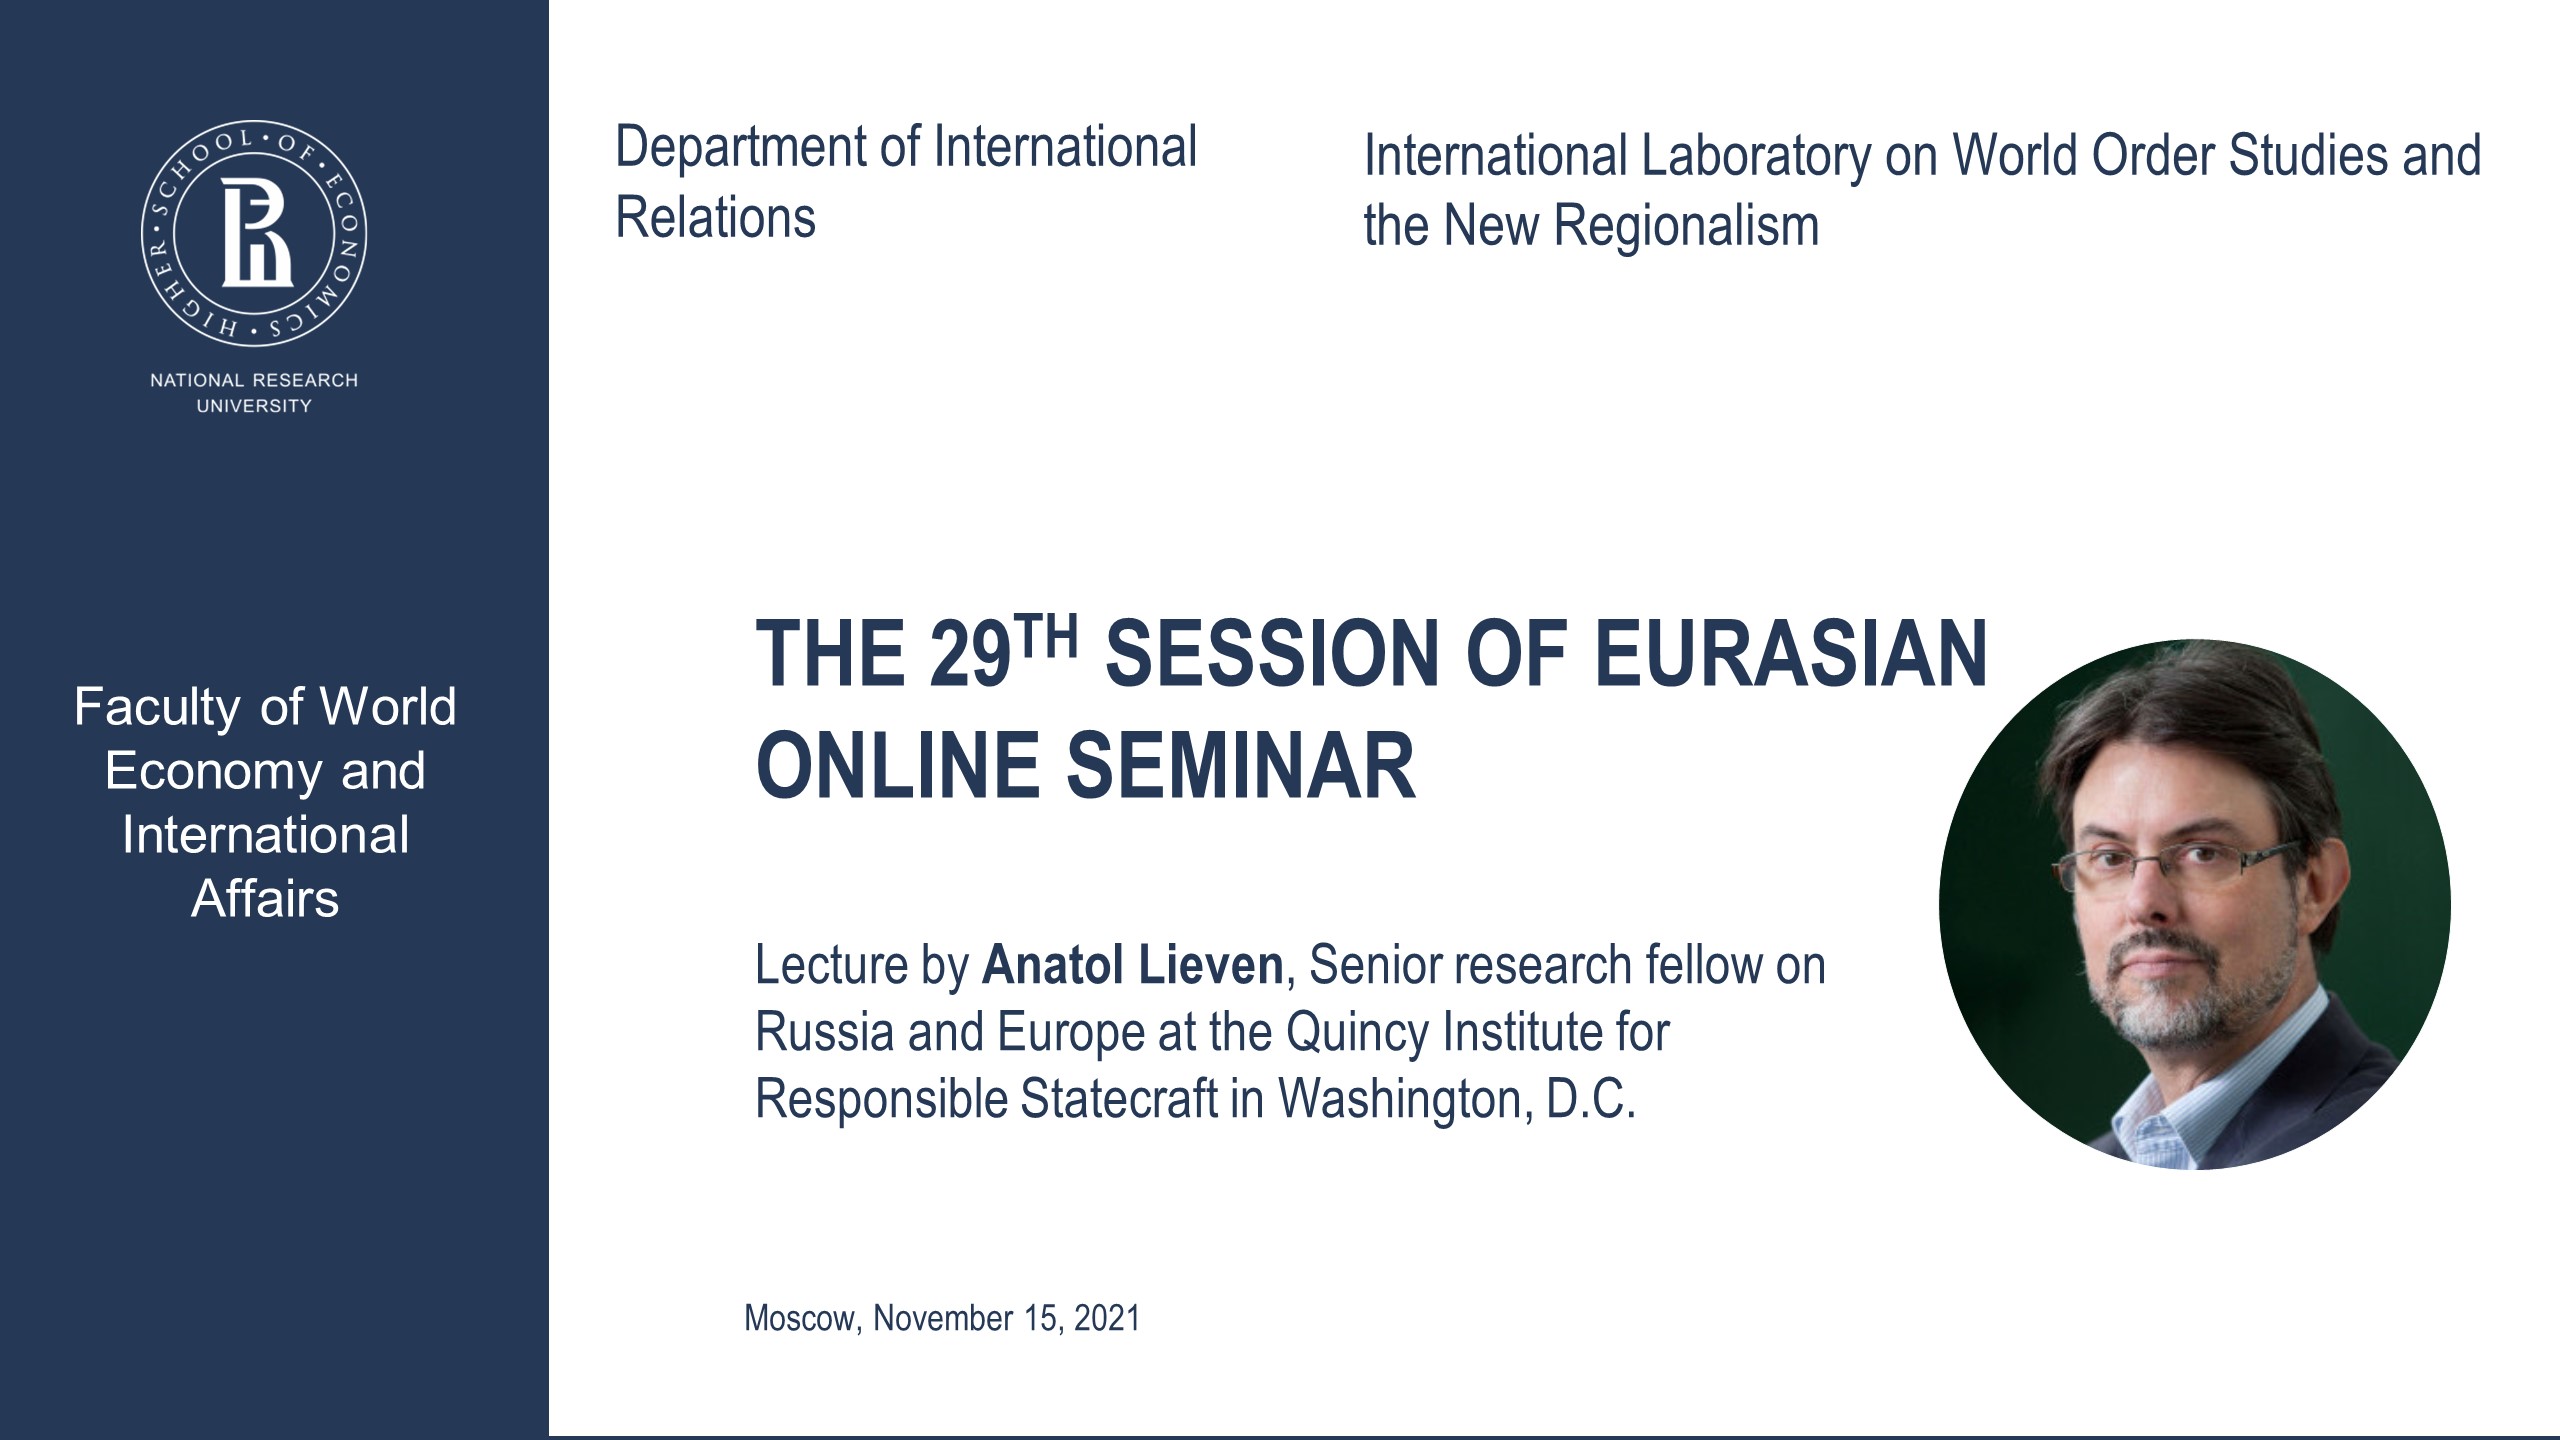 The 29th Session of Eurasian Online Seminar with Anatol Lieven.mp4